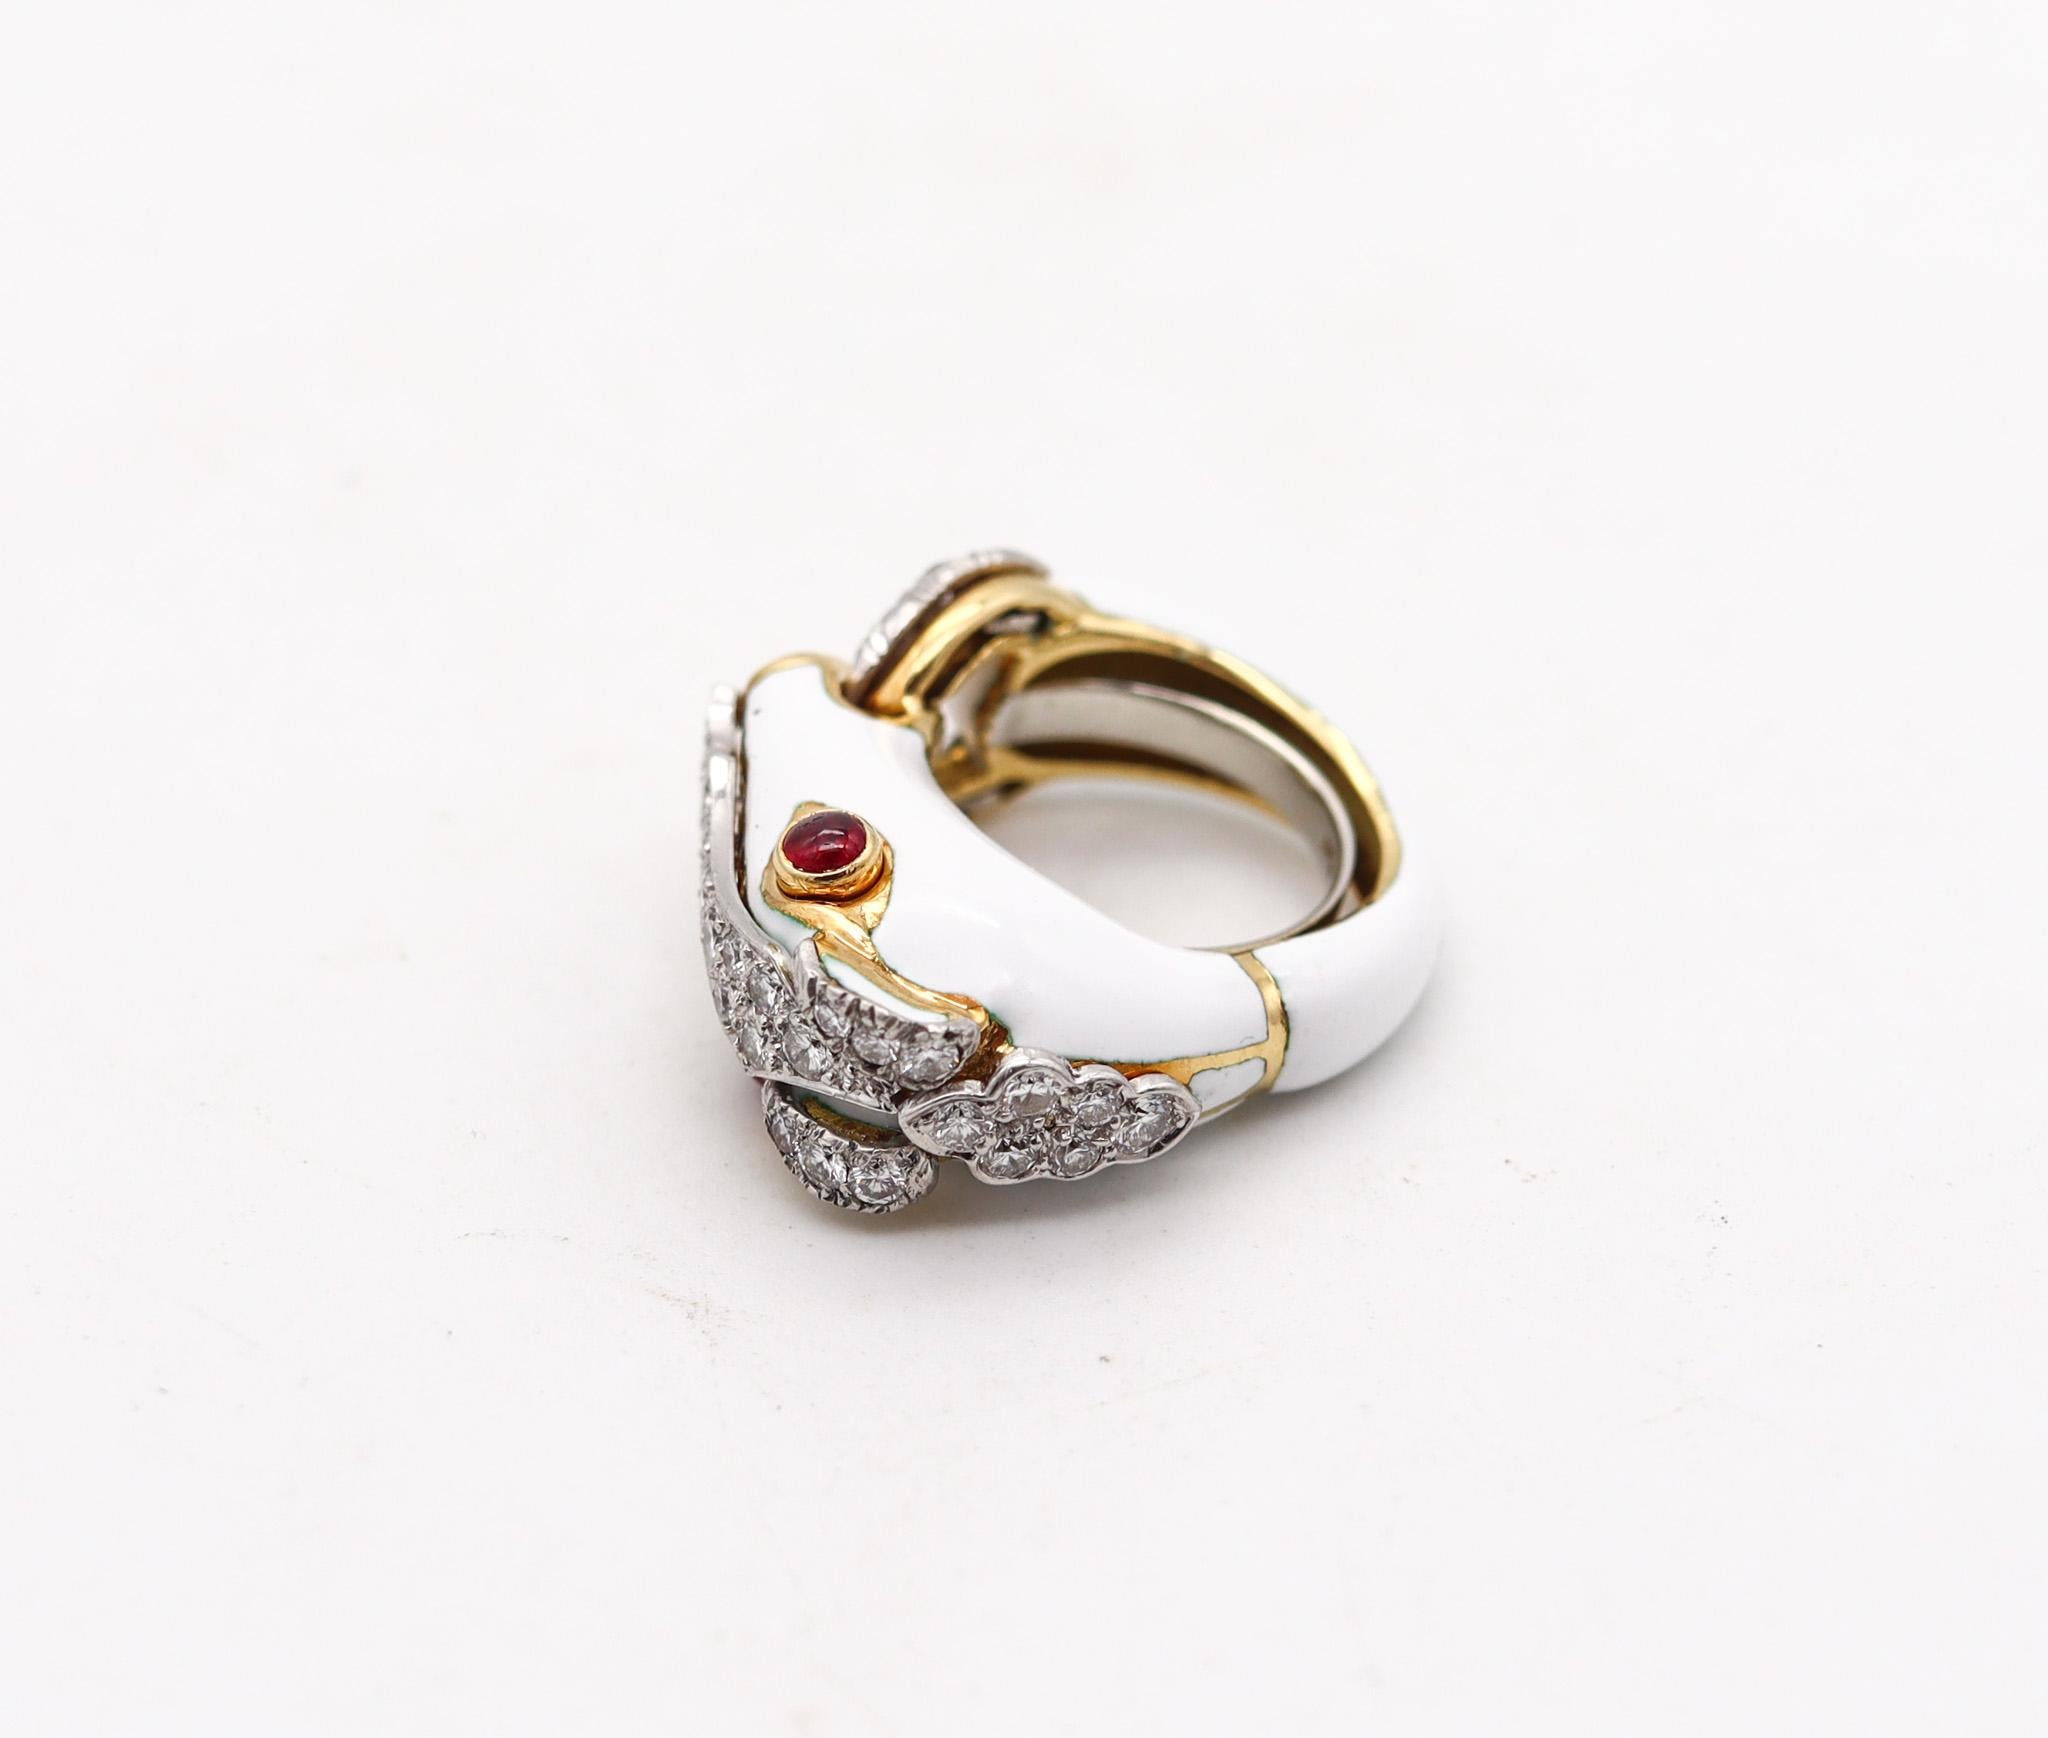 Modernist David Webb Enameled Horse Ring In 18Kt Gold And Platinum With Diamonds & Rubies For Sale